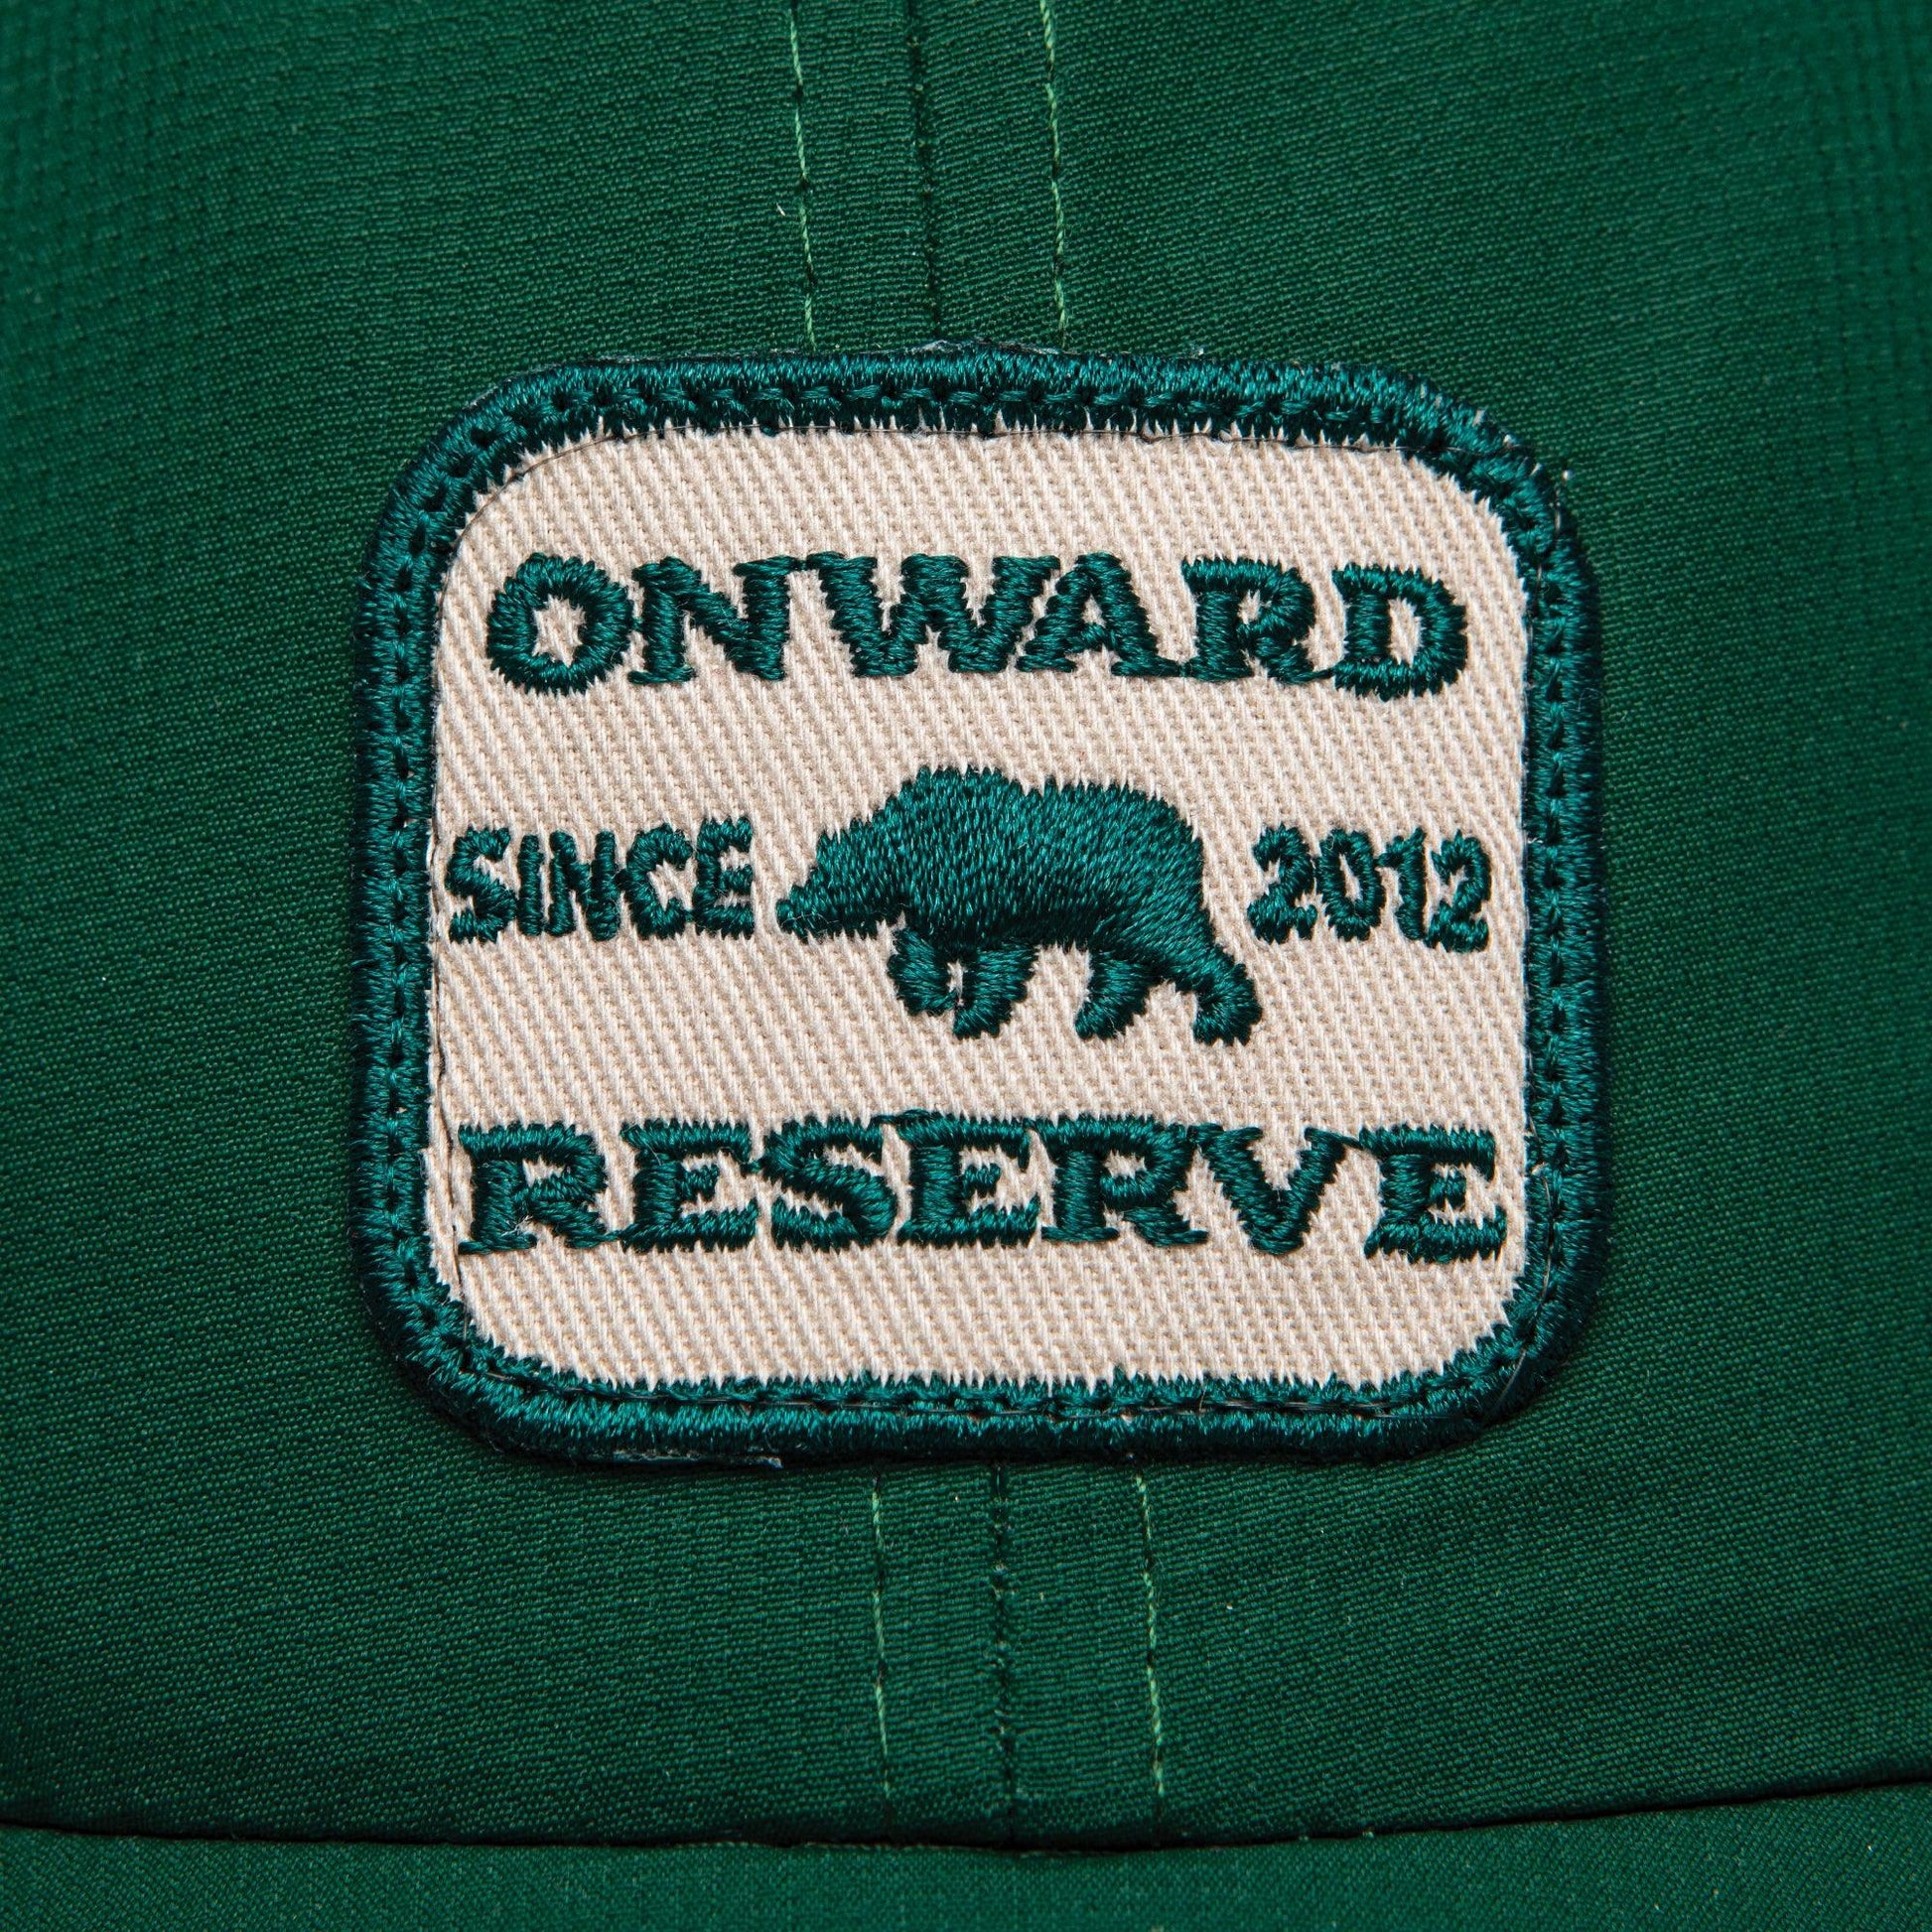 City and Country Patch Hat - Onward Reserve